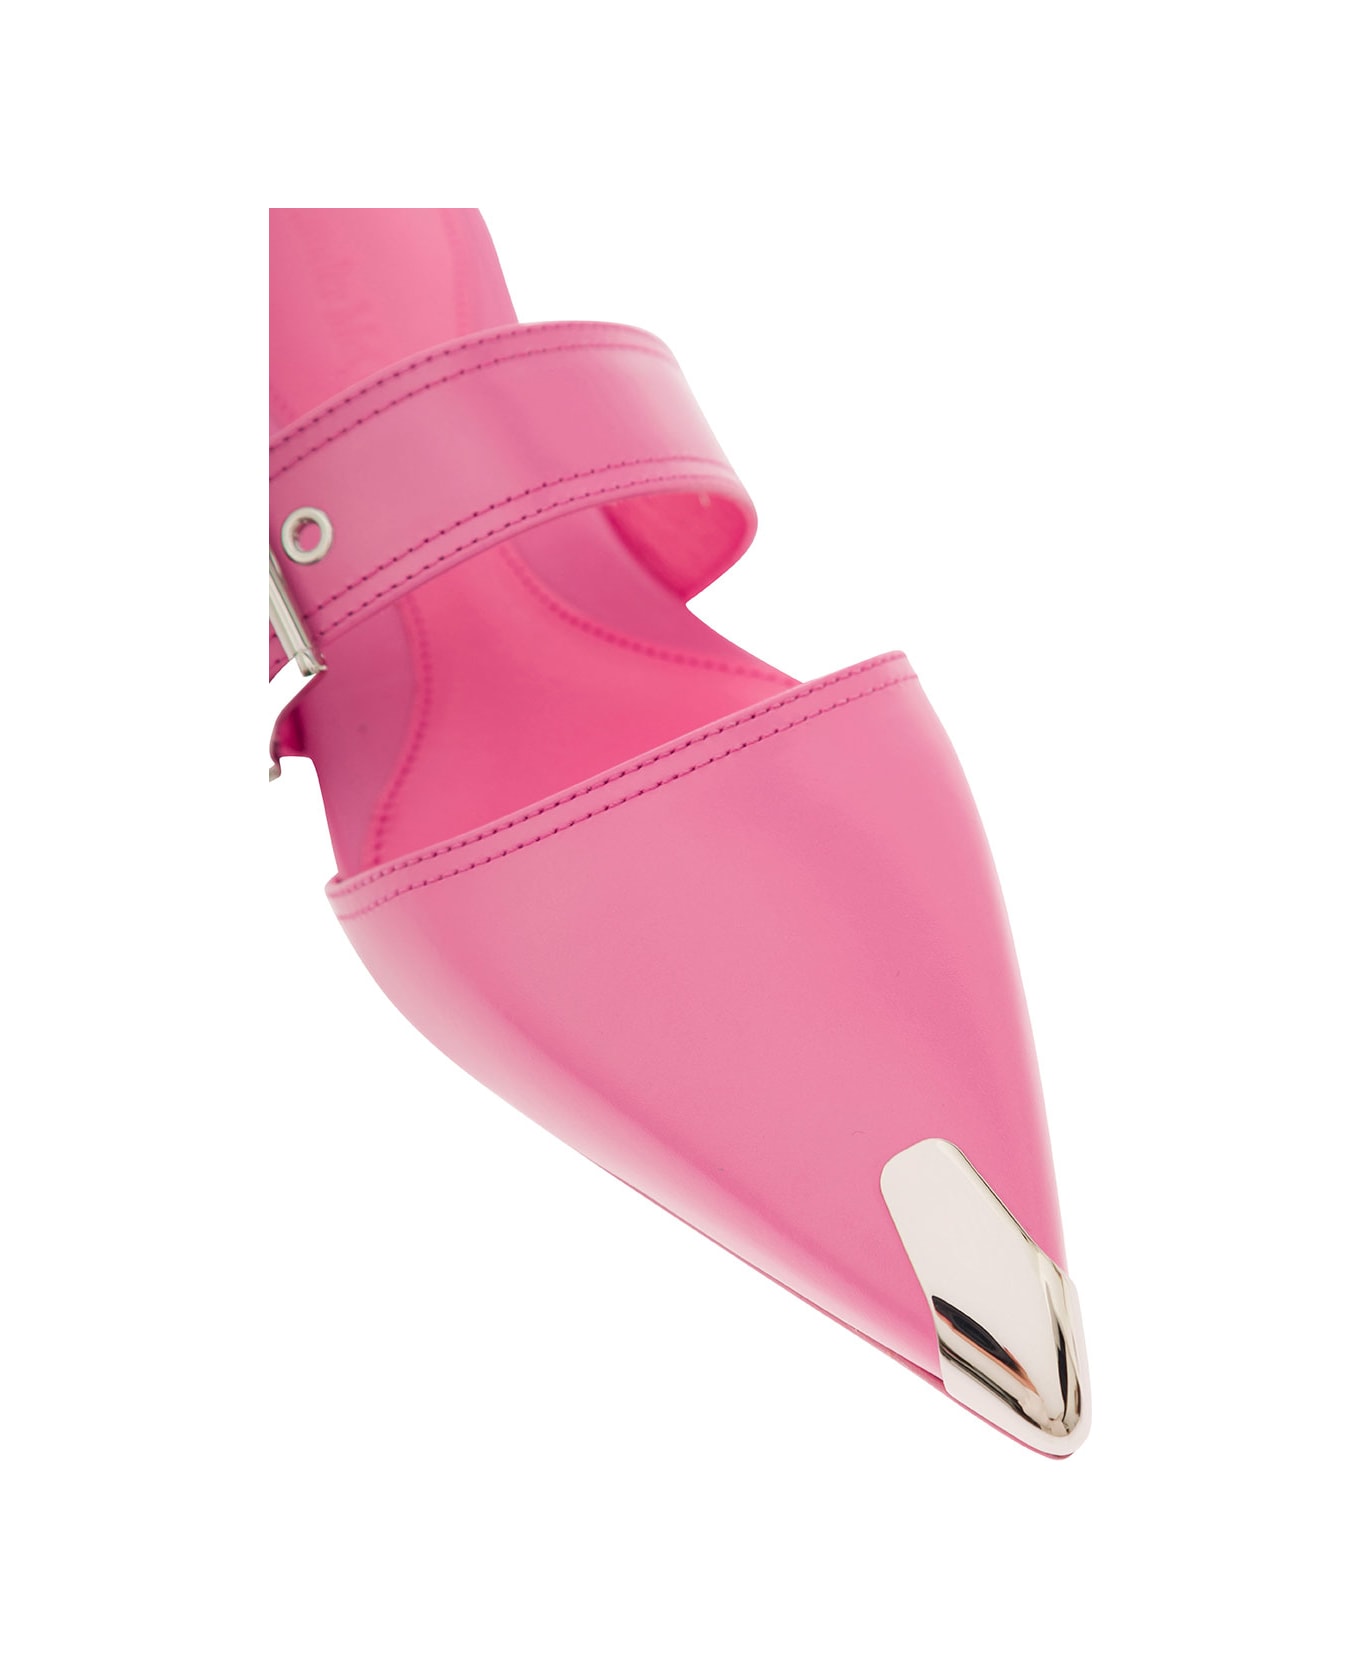 Alexander McQueen 'punk' Pink Mules With Metal Tip In Leather Woman - Pink サンダル